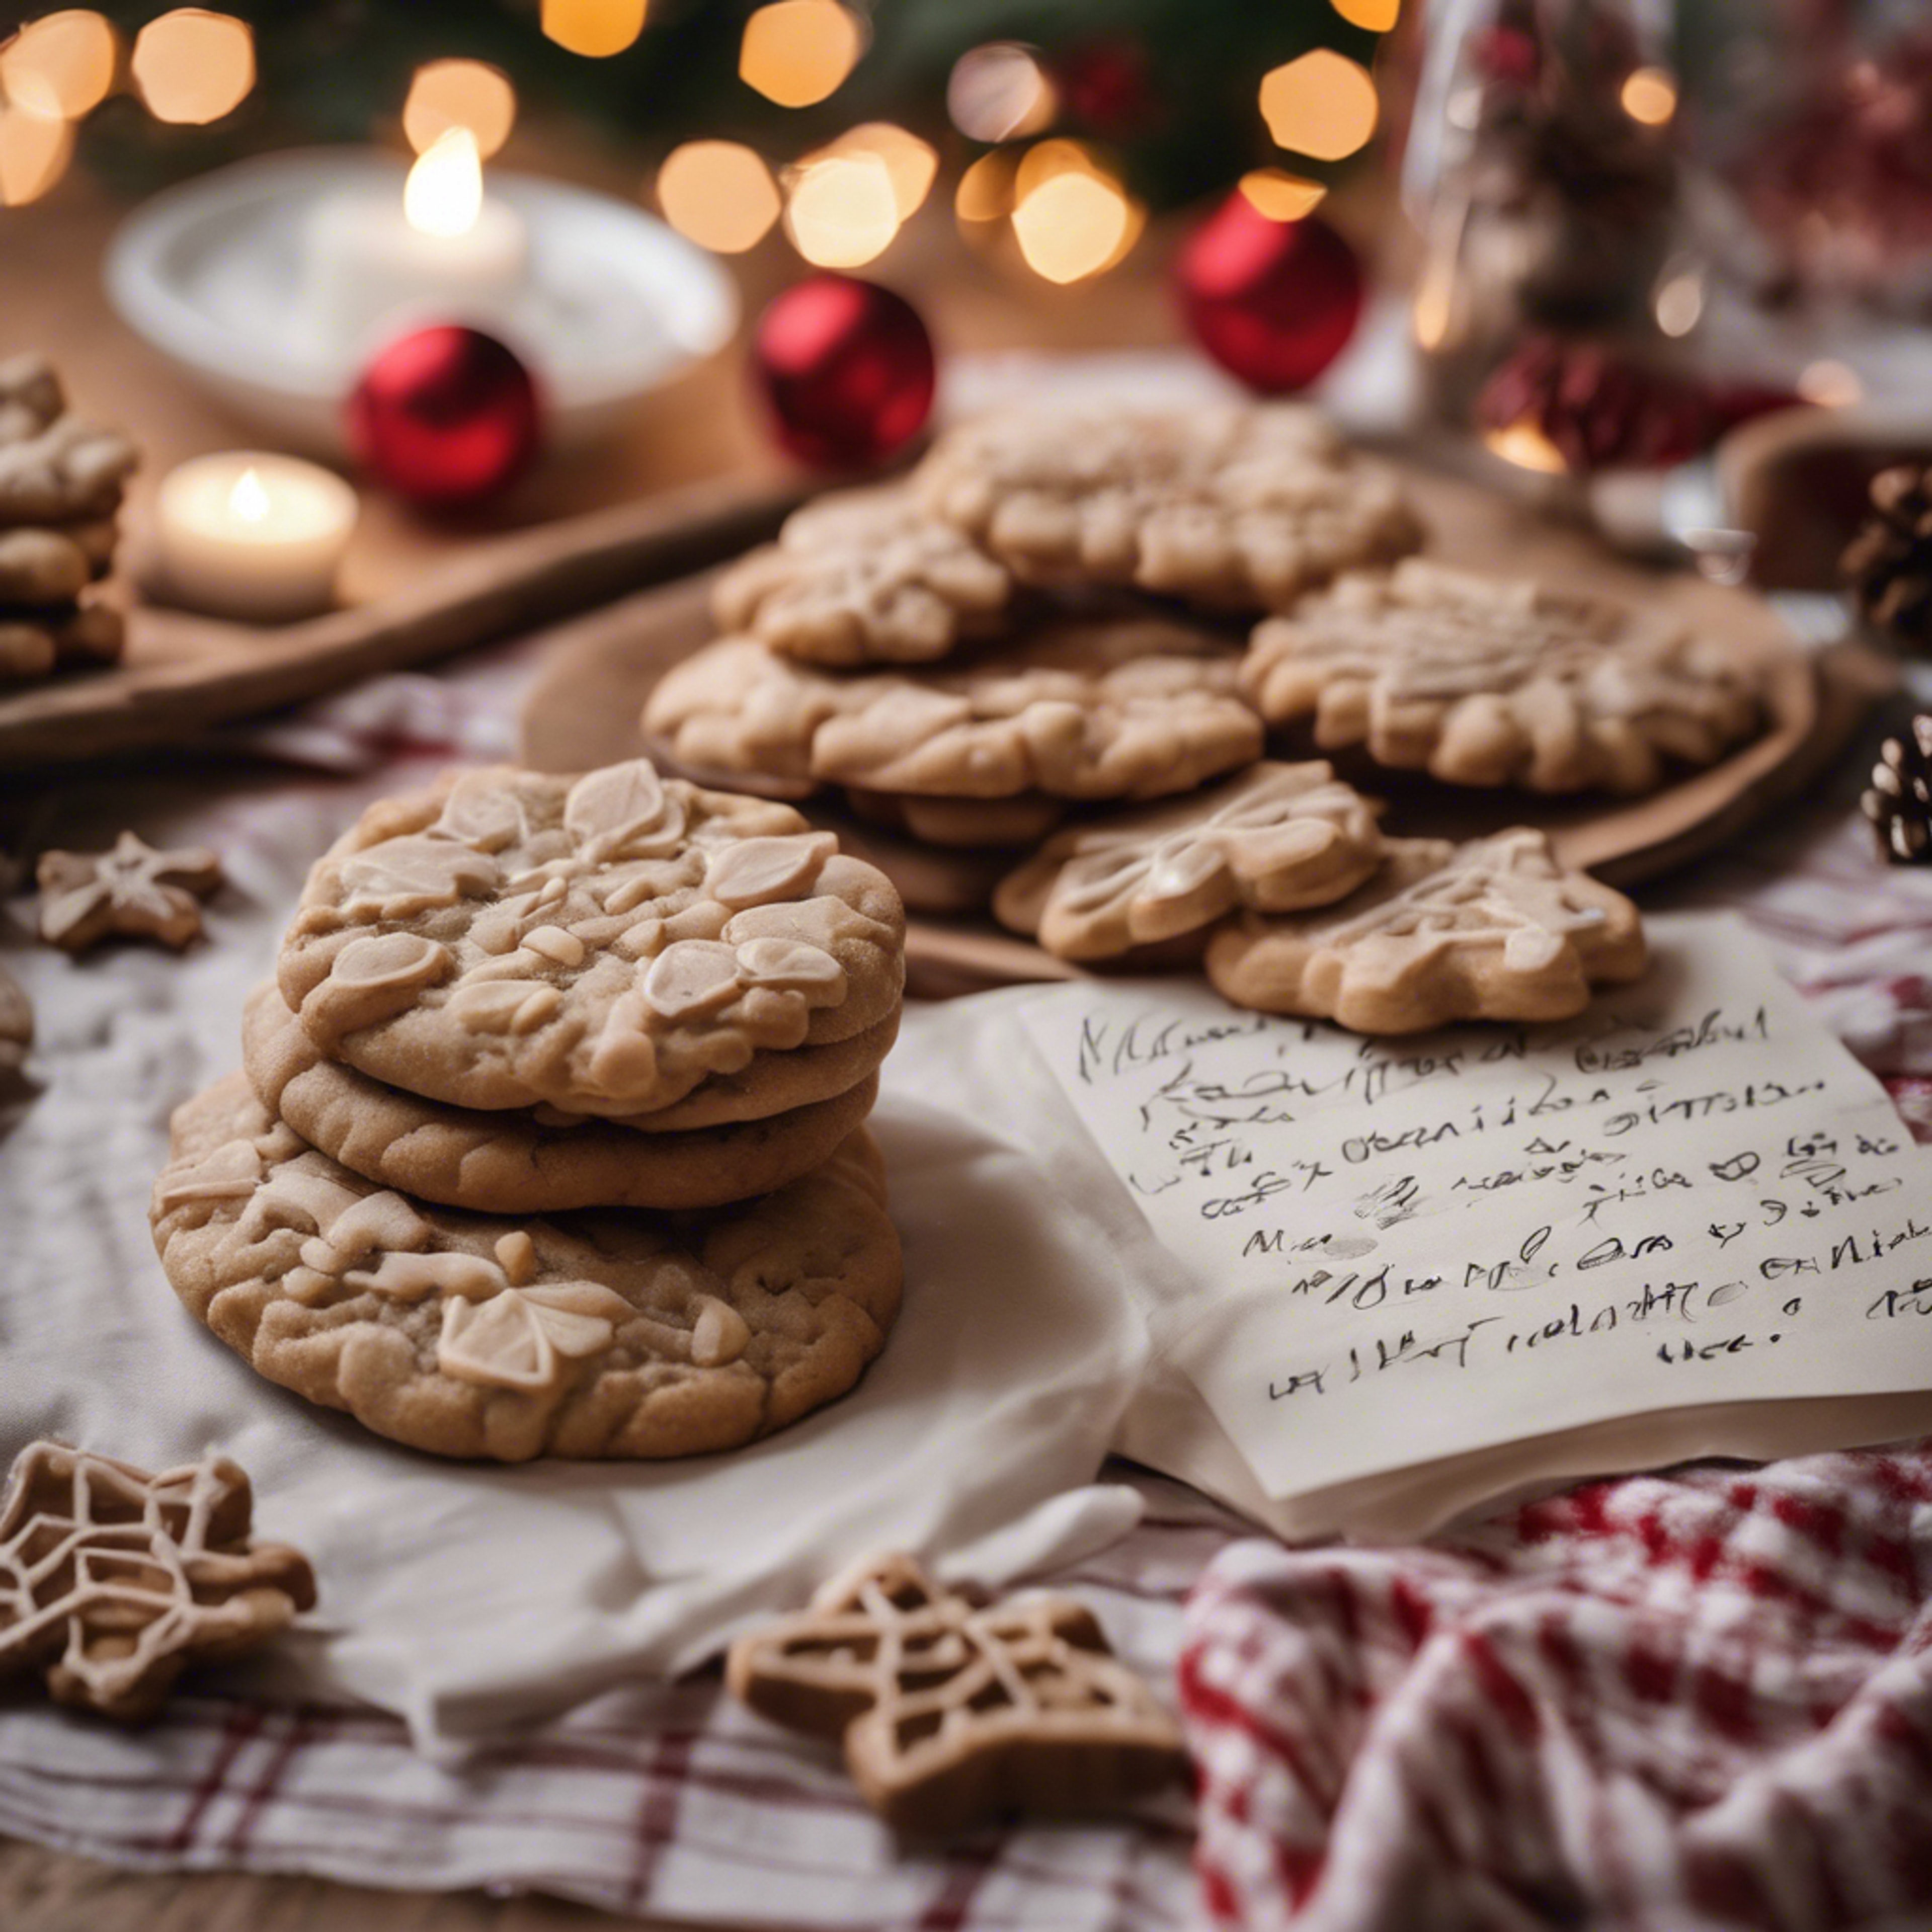 A spread of cozy, homemade Christmas cookies on a festive tablecloth, a glass of milk, and a note to Santa. Tapeta[2a748ec29b0a47b6b2f7]